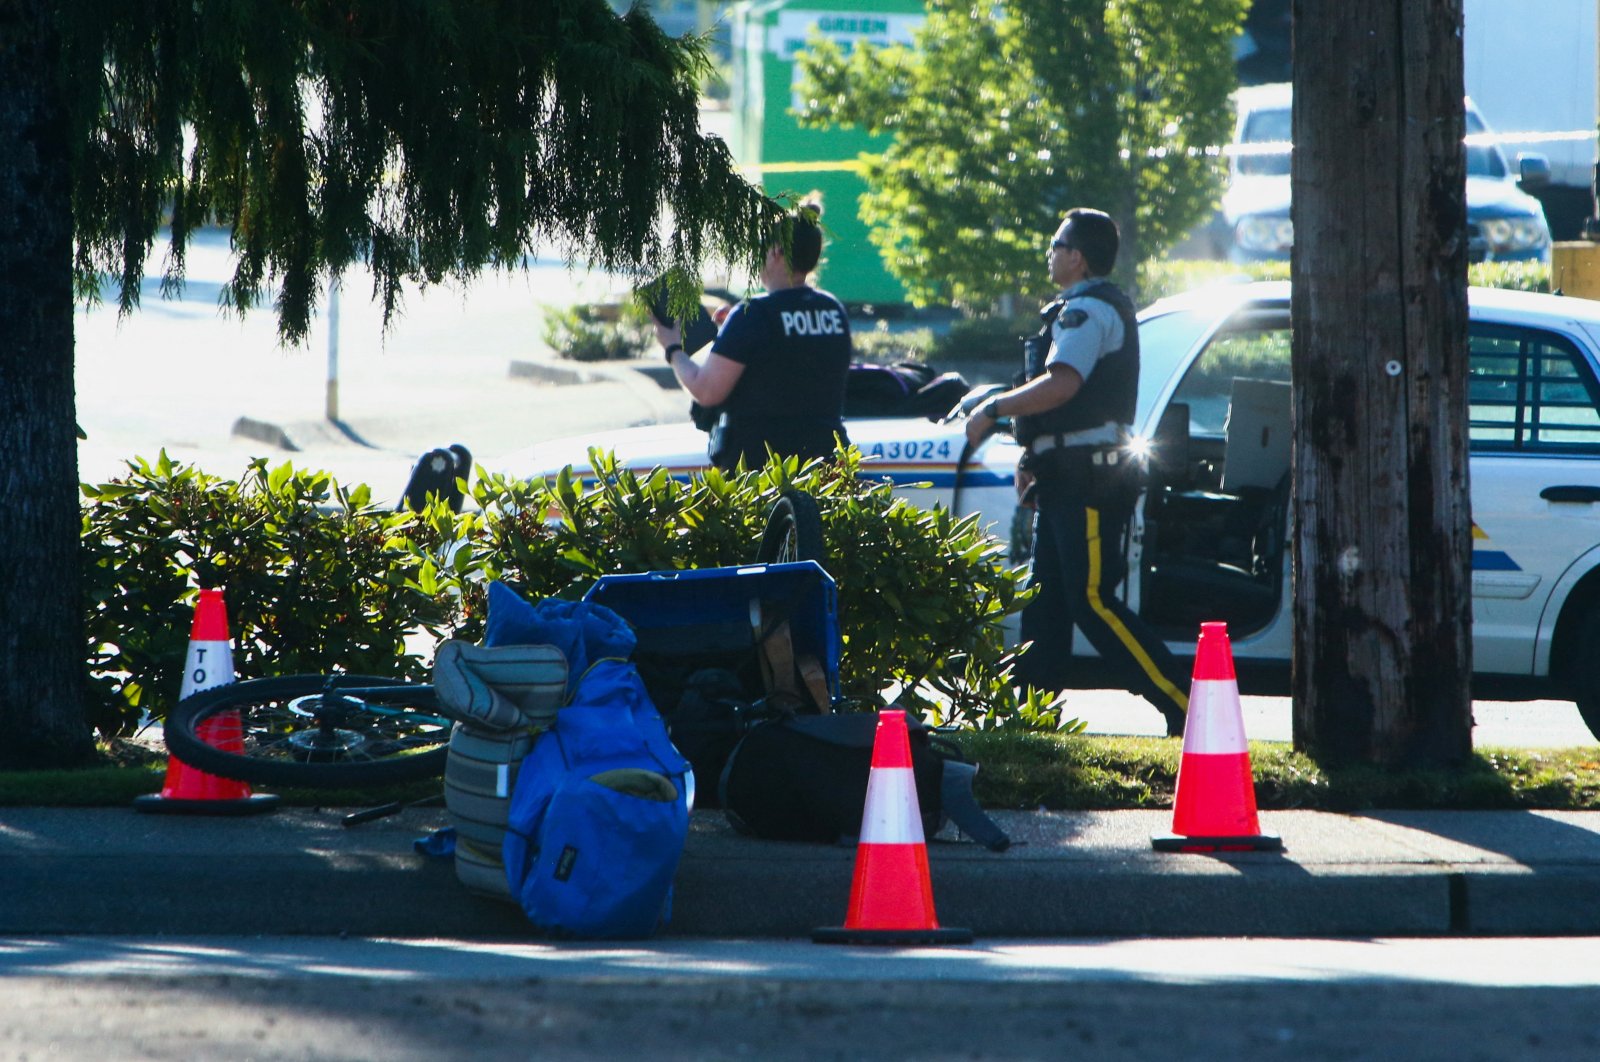 Police officers work at the site after authorities alerted residents of multiple shootings targeting transient victims in the Vancouver suburb of Langley, British Columbia, Canada, July 25, 2022. (Reuters Photo)